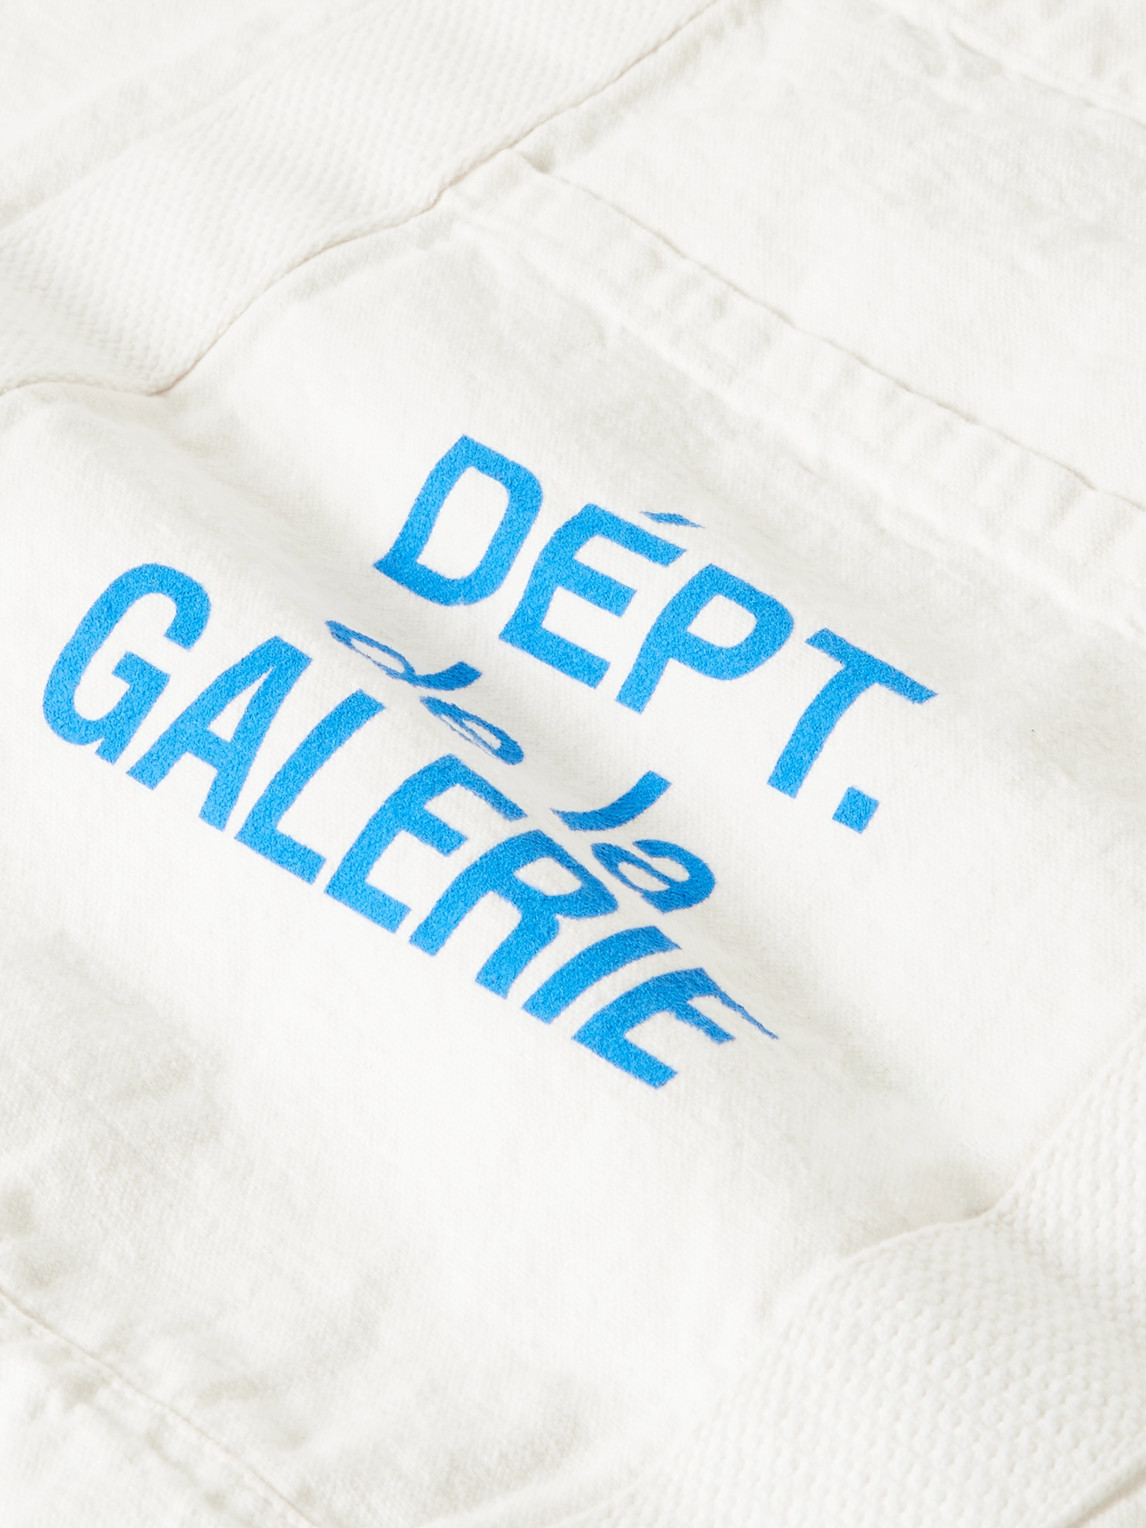 Shop Gallery Dept. Logo-print Webbing-trimmed Cotton-canvas Tote Bag In White